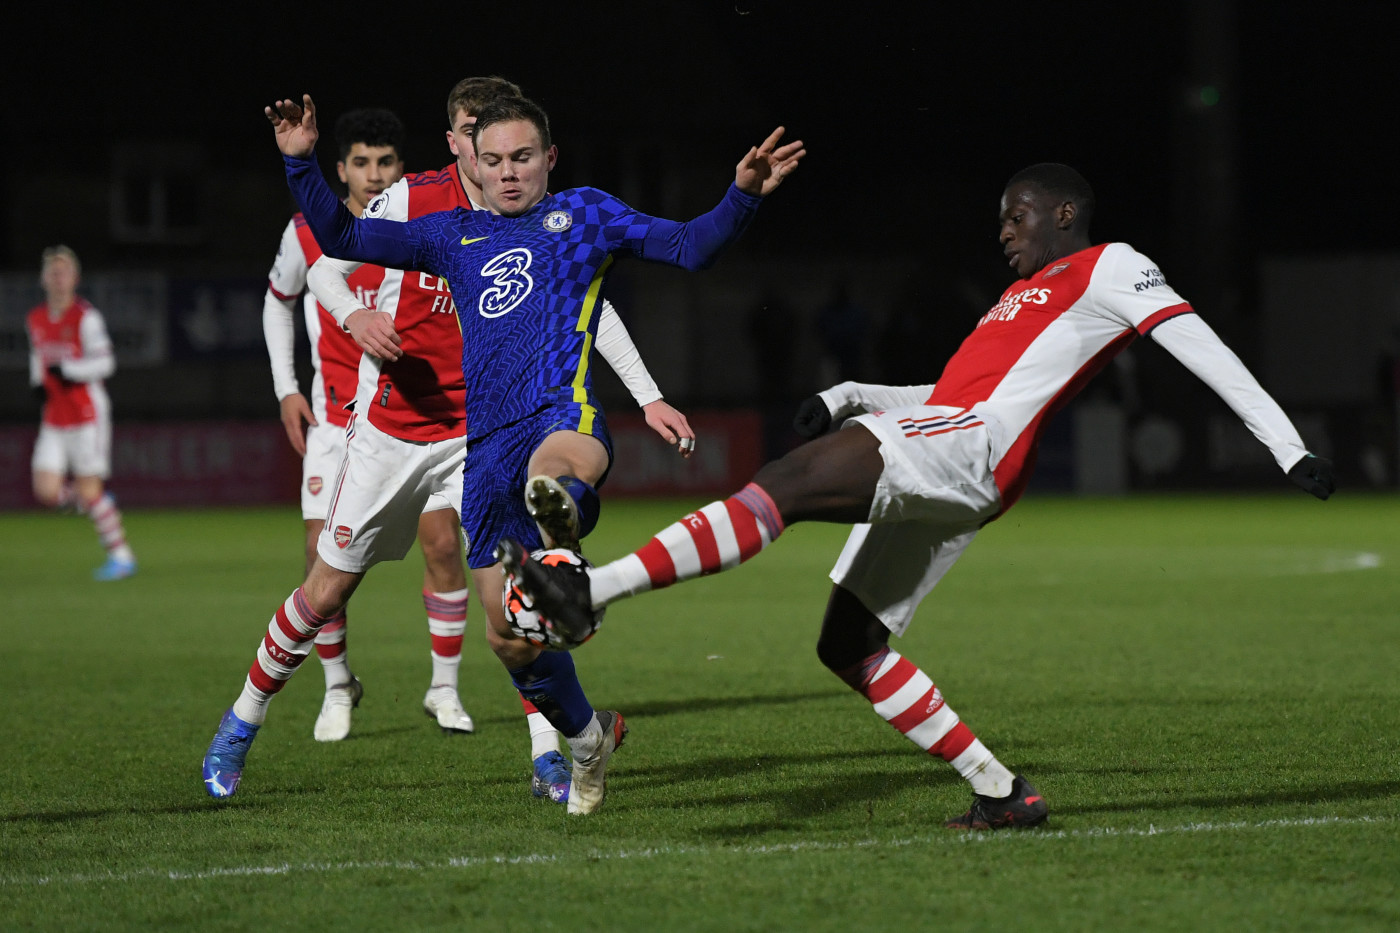 Report & Highlights: U21s beaten by Arsenal in PL2 opener